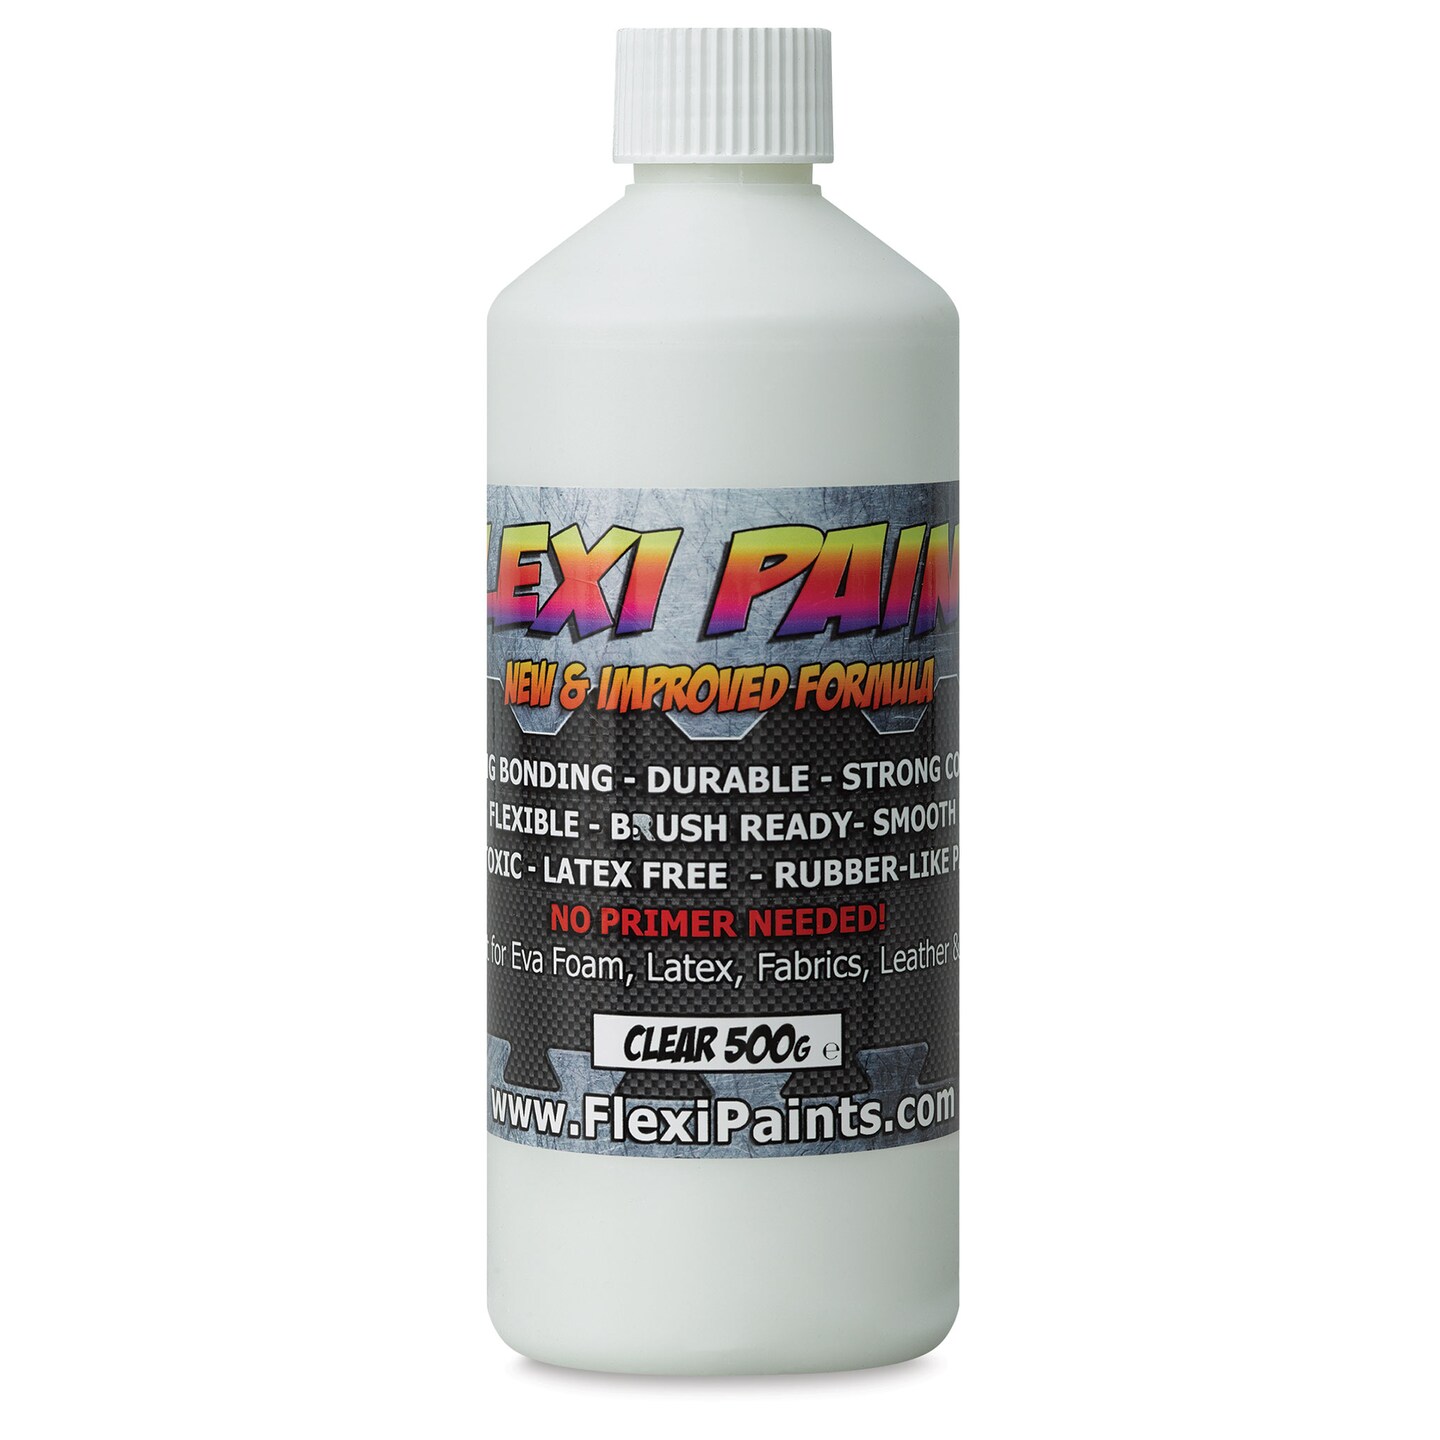 Flexi Paint Waterbased Flexible Cosplay Paint - Clear, 500 g (17.6 oz)